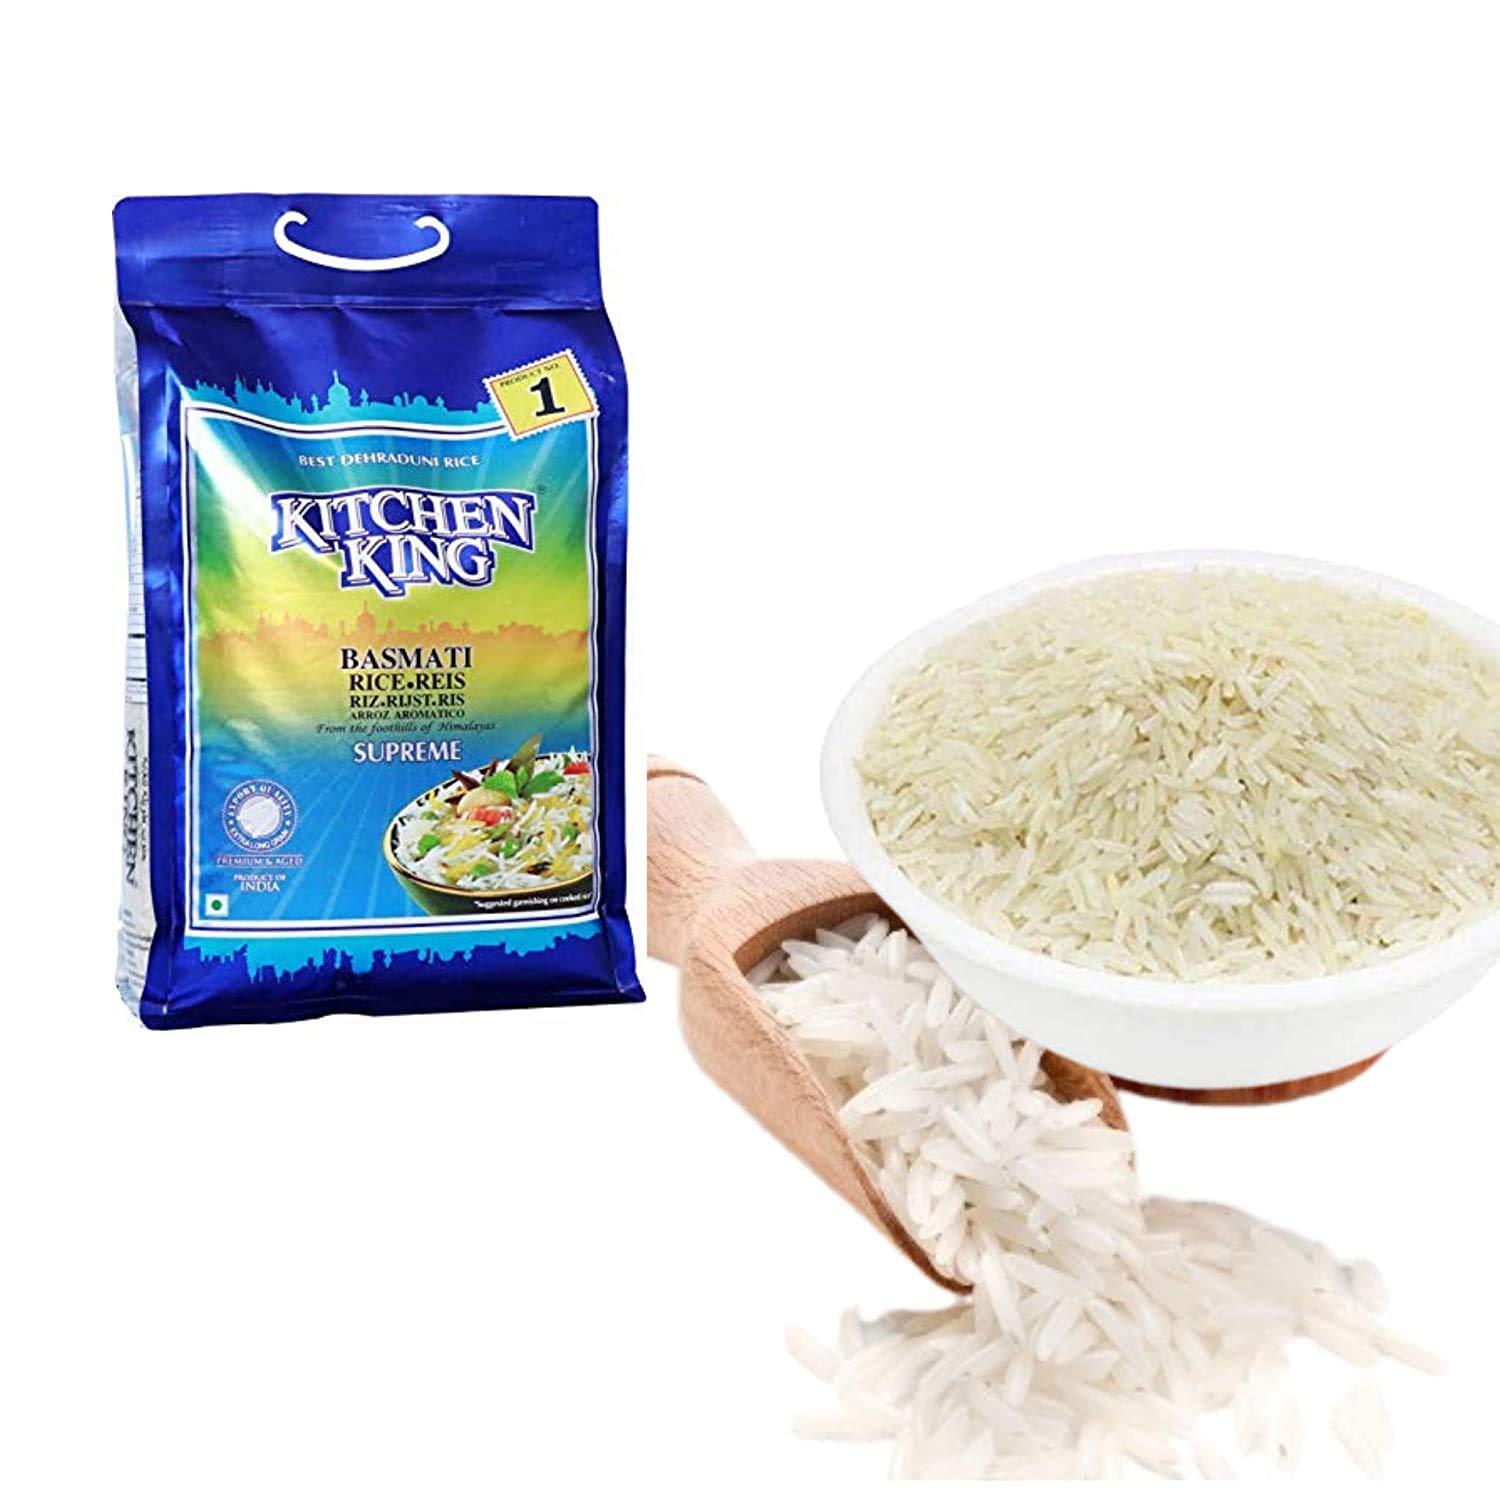 Enriched rice - Supreme Rice - 2 lbs